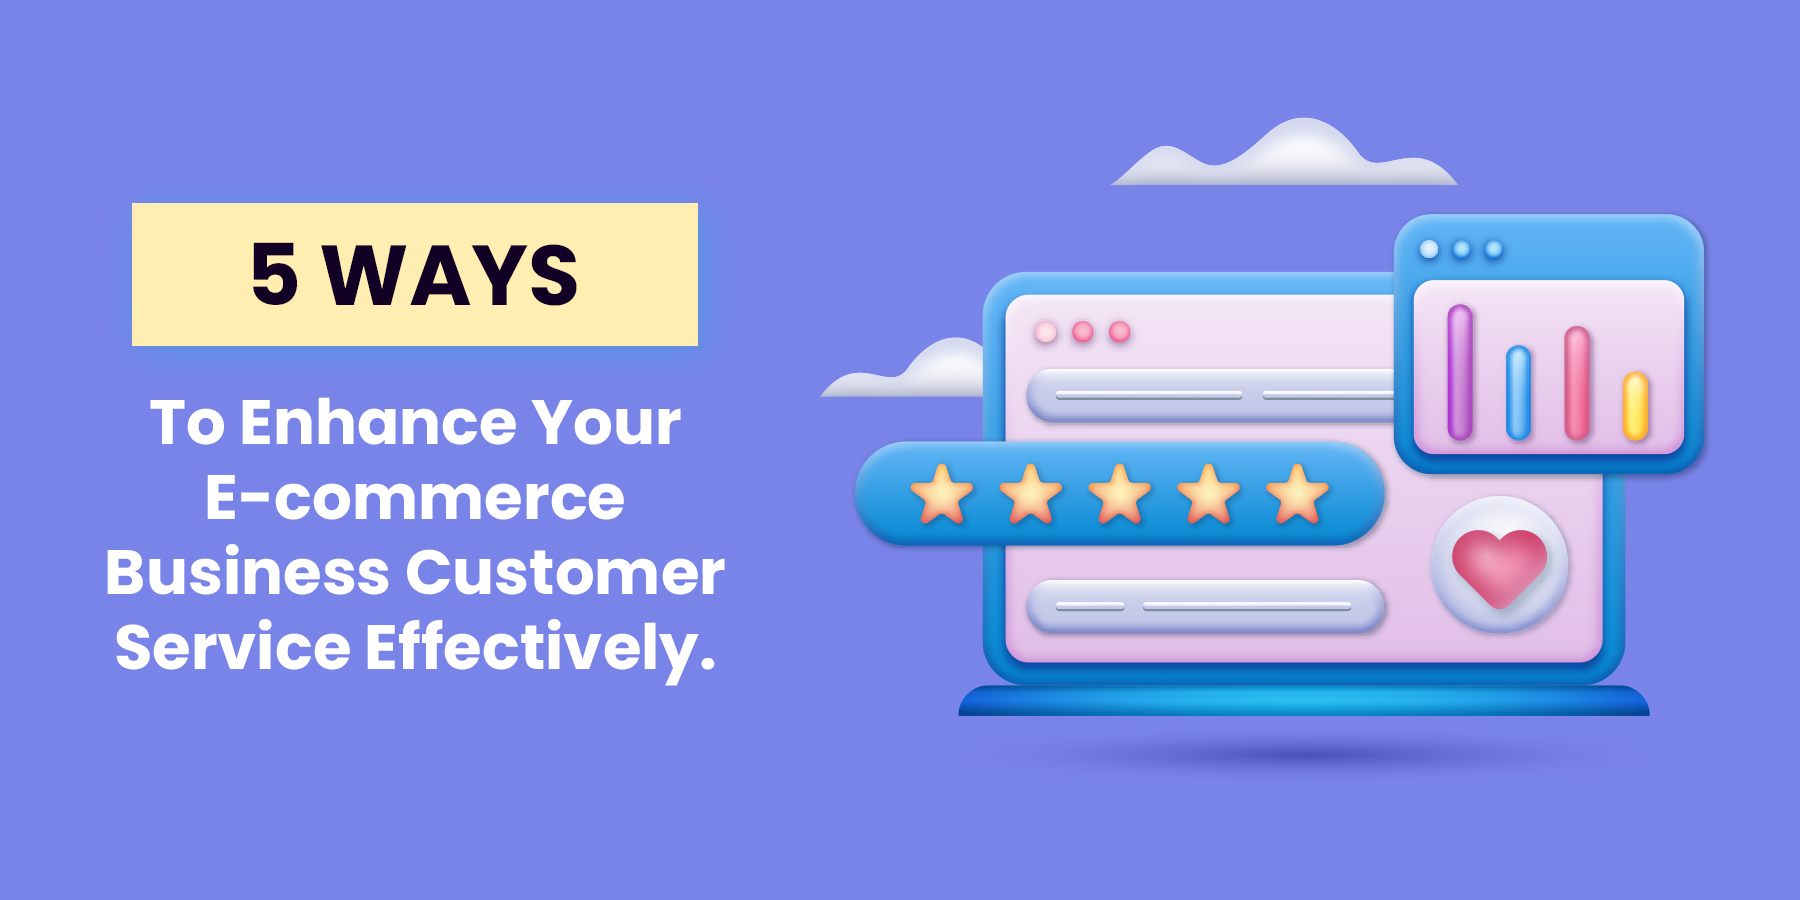 Ways to Enhance Your E-commerce Business Customer Service Effectively